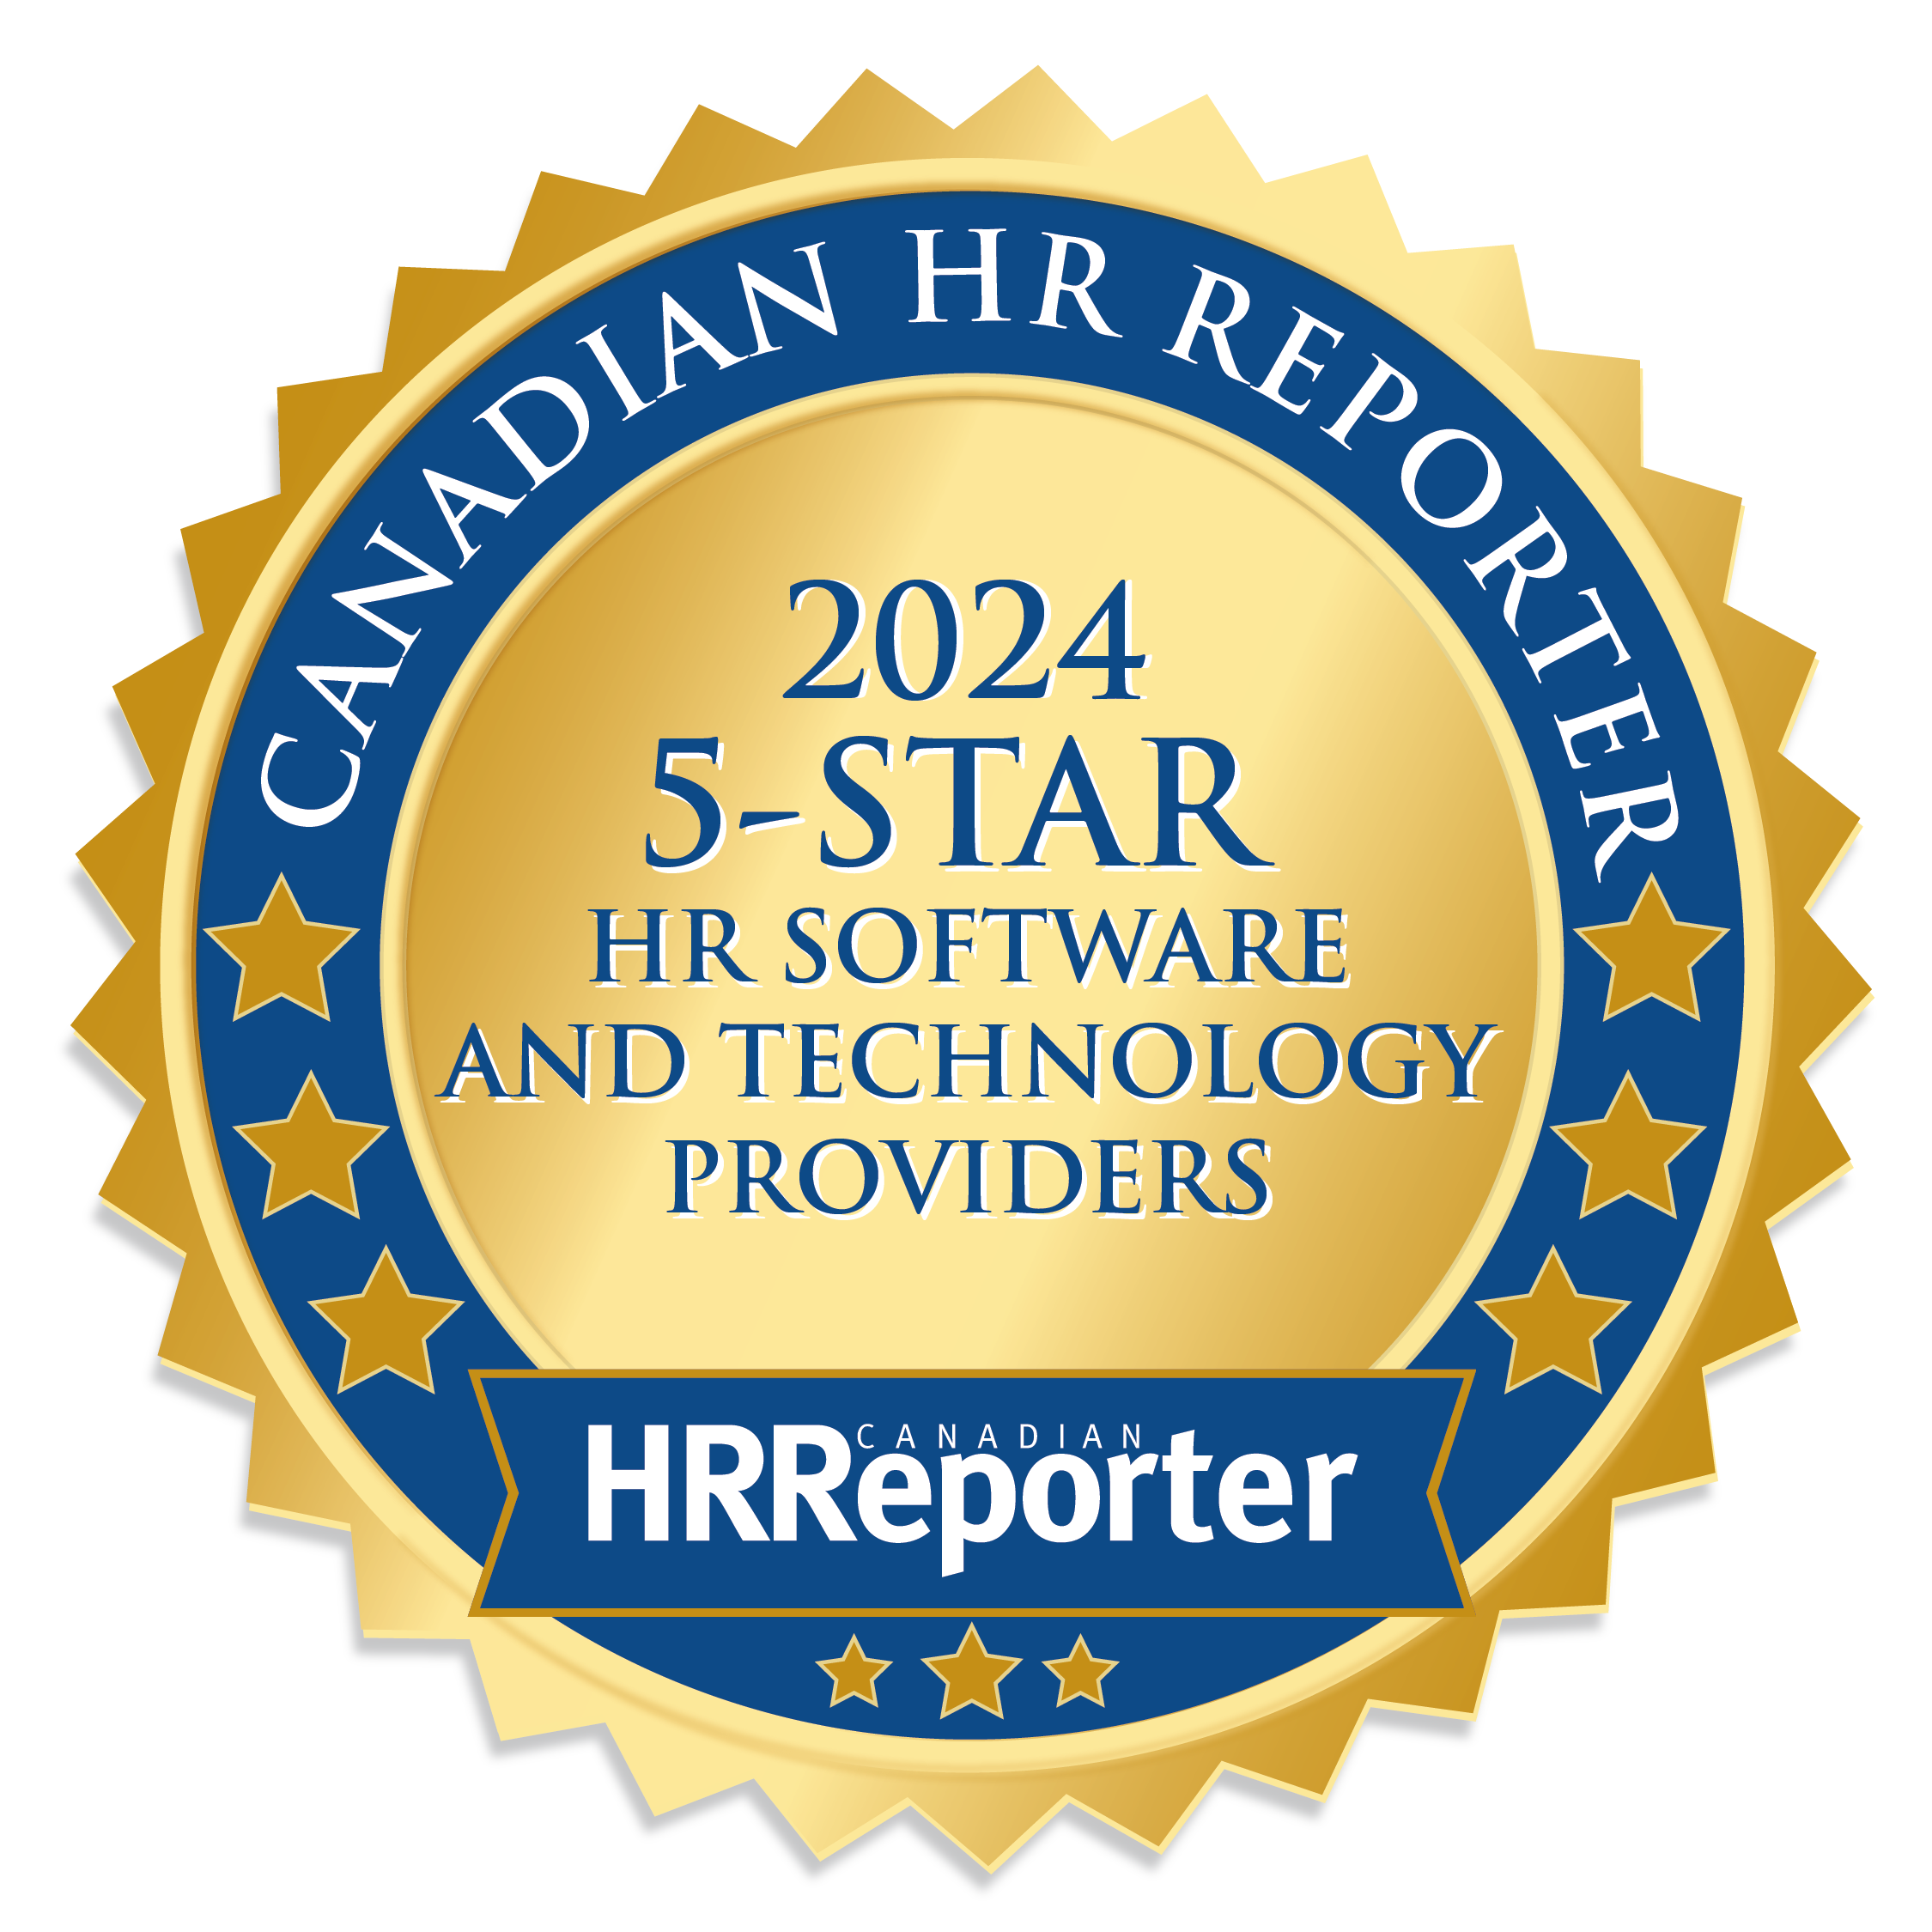 The Best Canadian HR Software Providers | 5-Star HR Technology